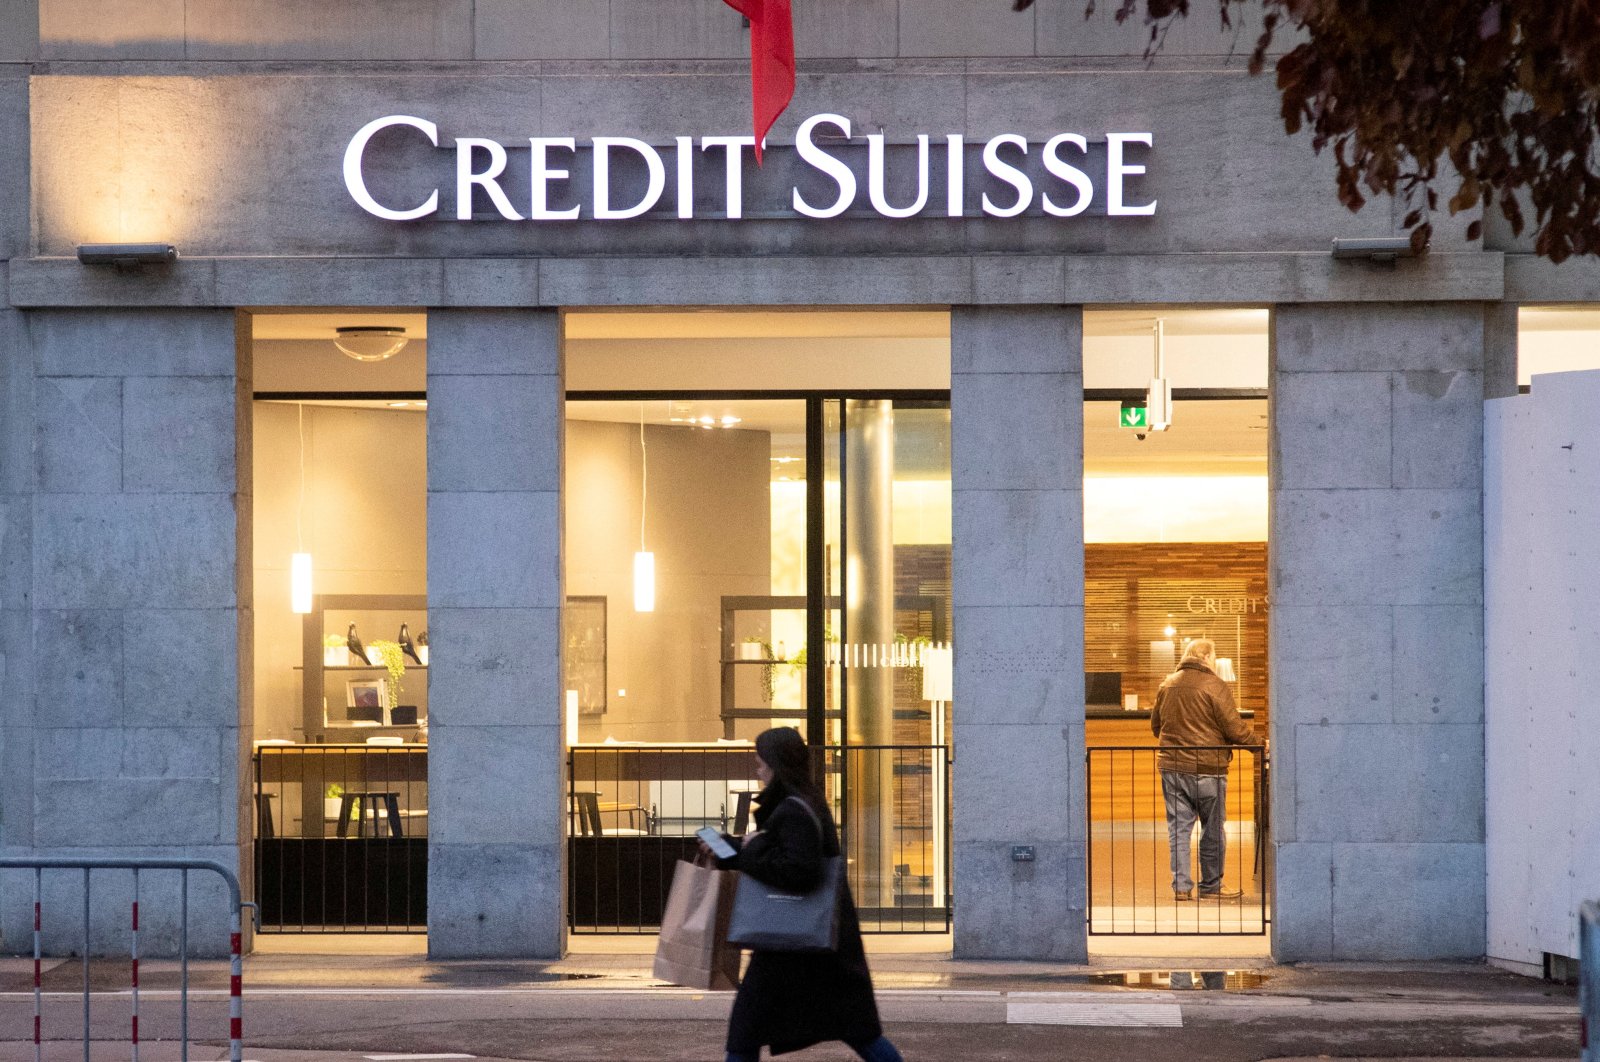 The logo of Swiss bank Credit Suisse is seen in front of a branch office in Bern, Switzerland, Nov. 29, 2022. (Reuters Photo)